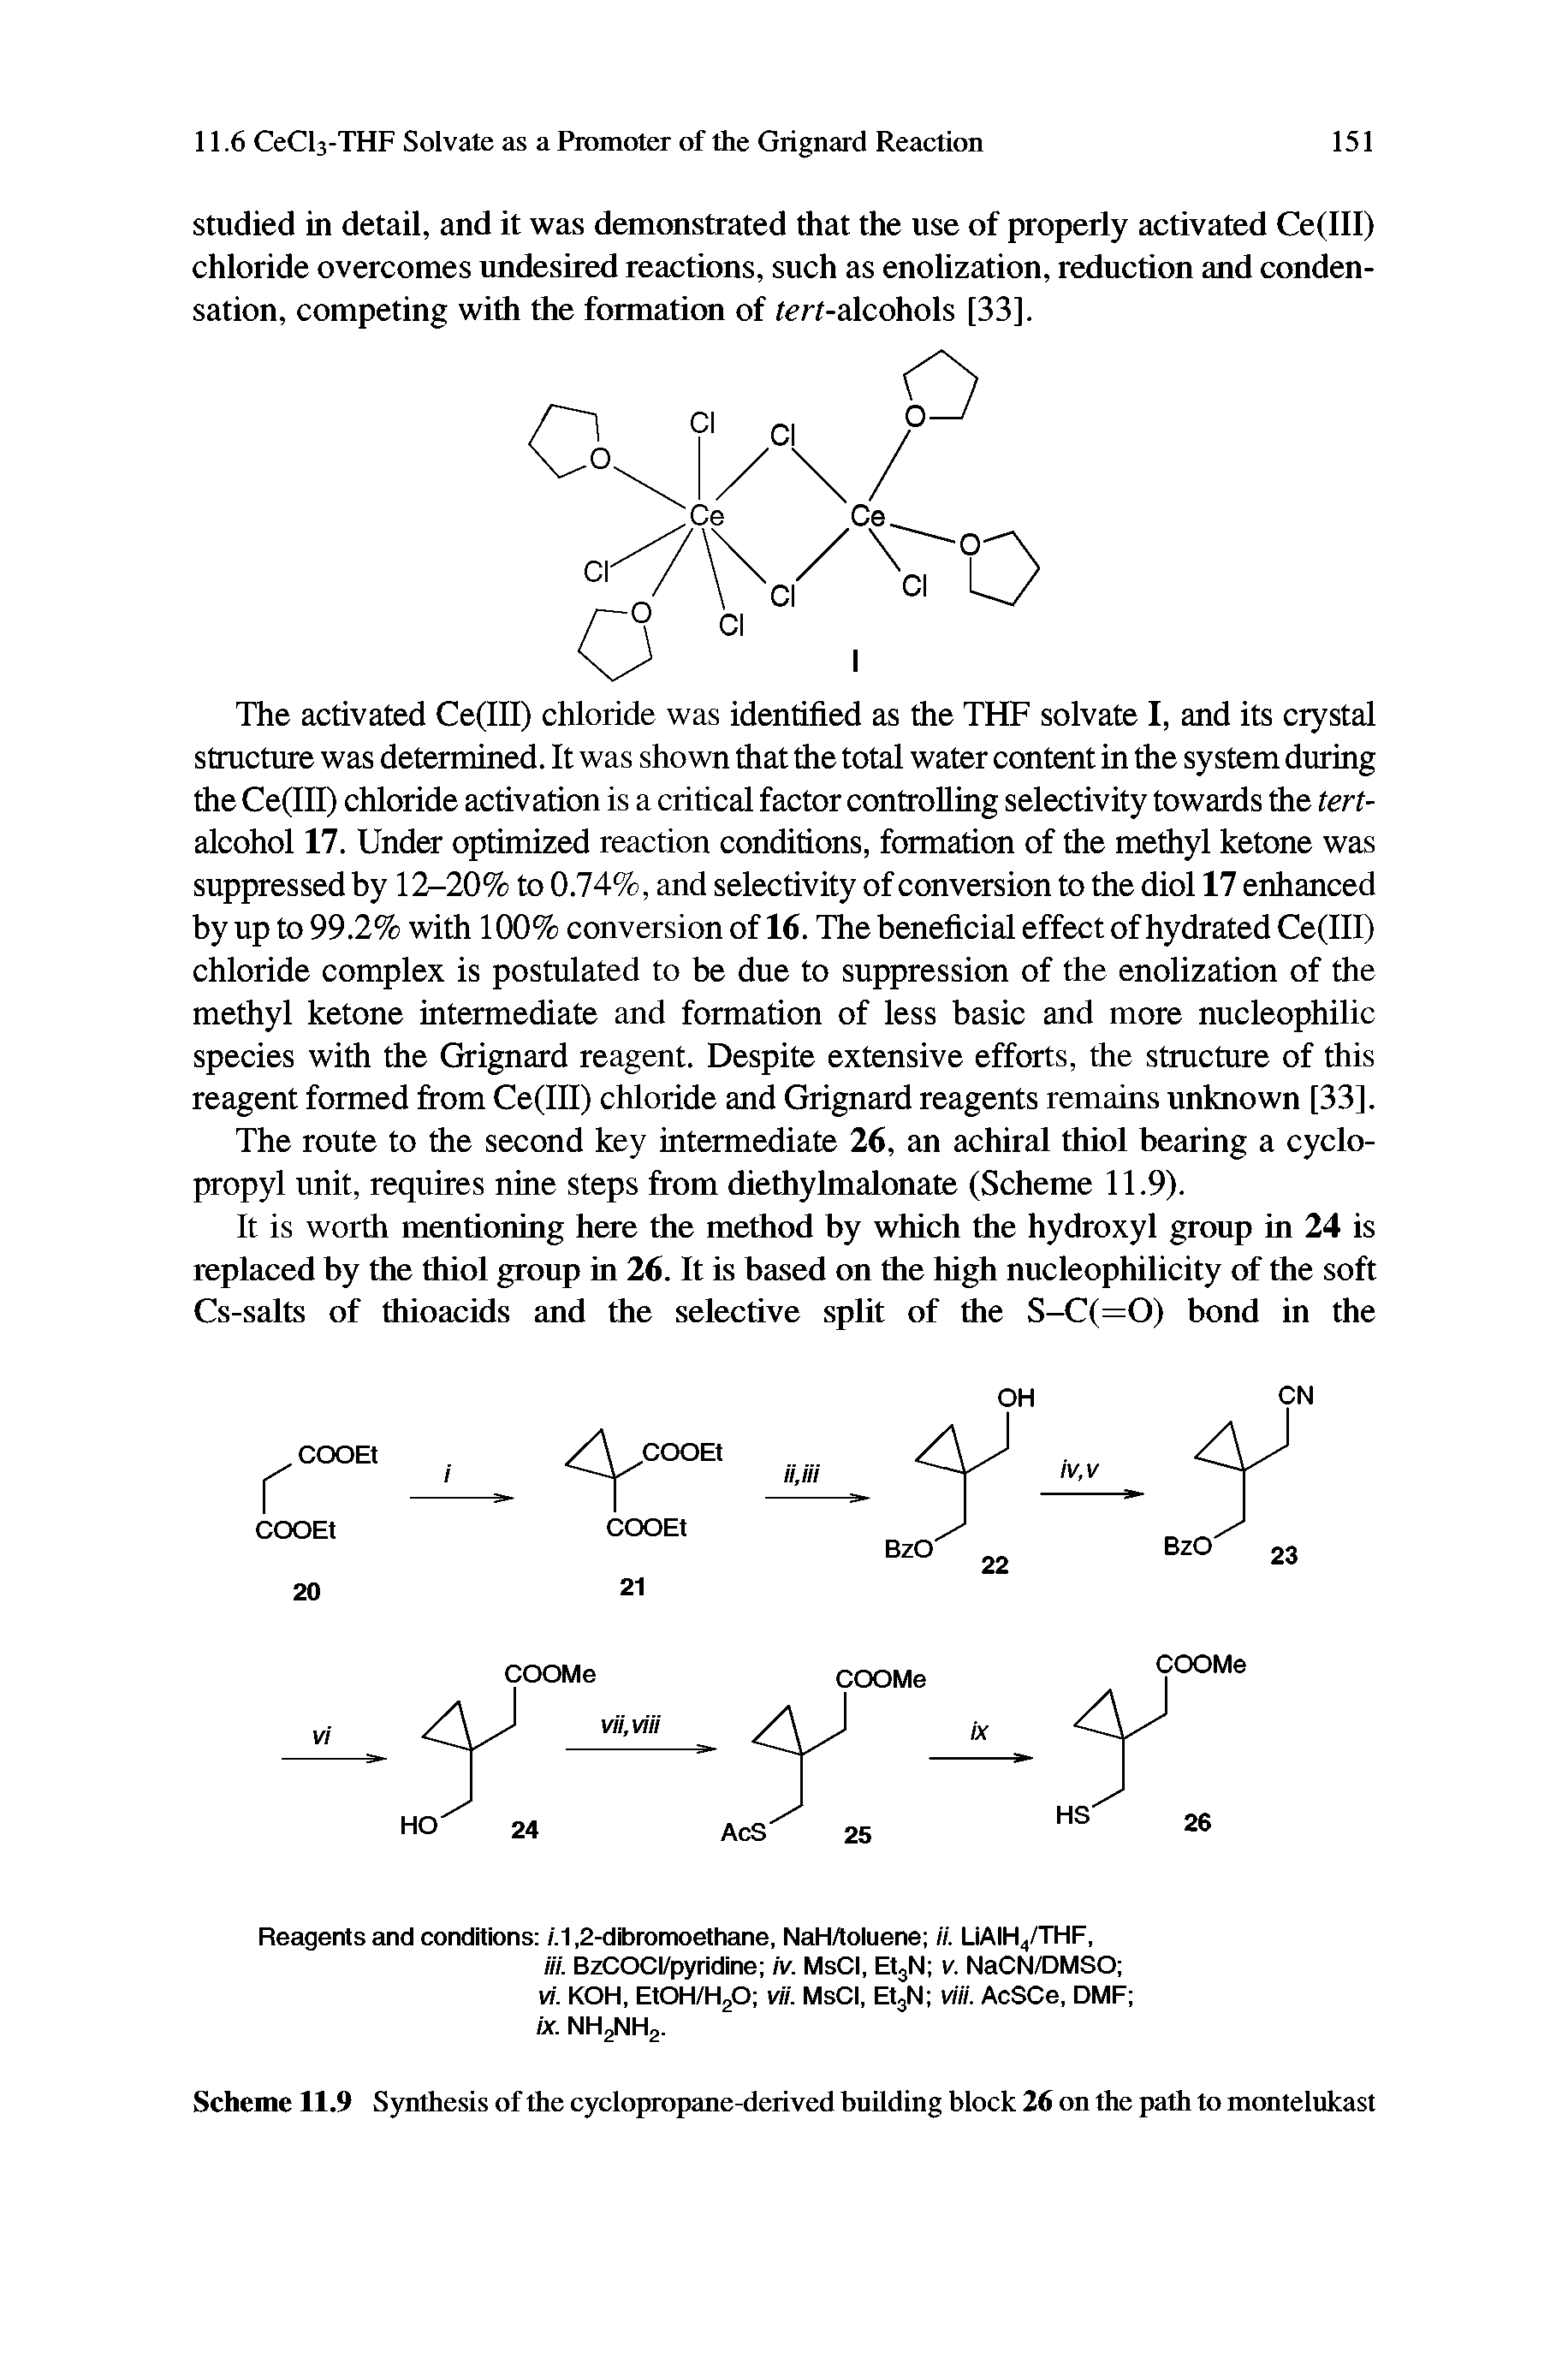 Scheme 11.9 Synthesis of the cyclopropane-derived building block 26 on the path to montelukast...